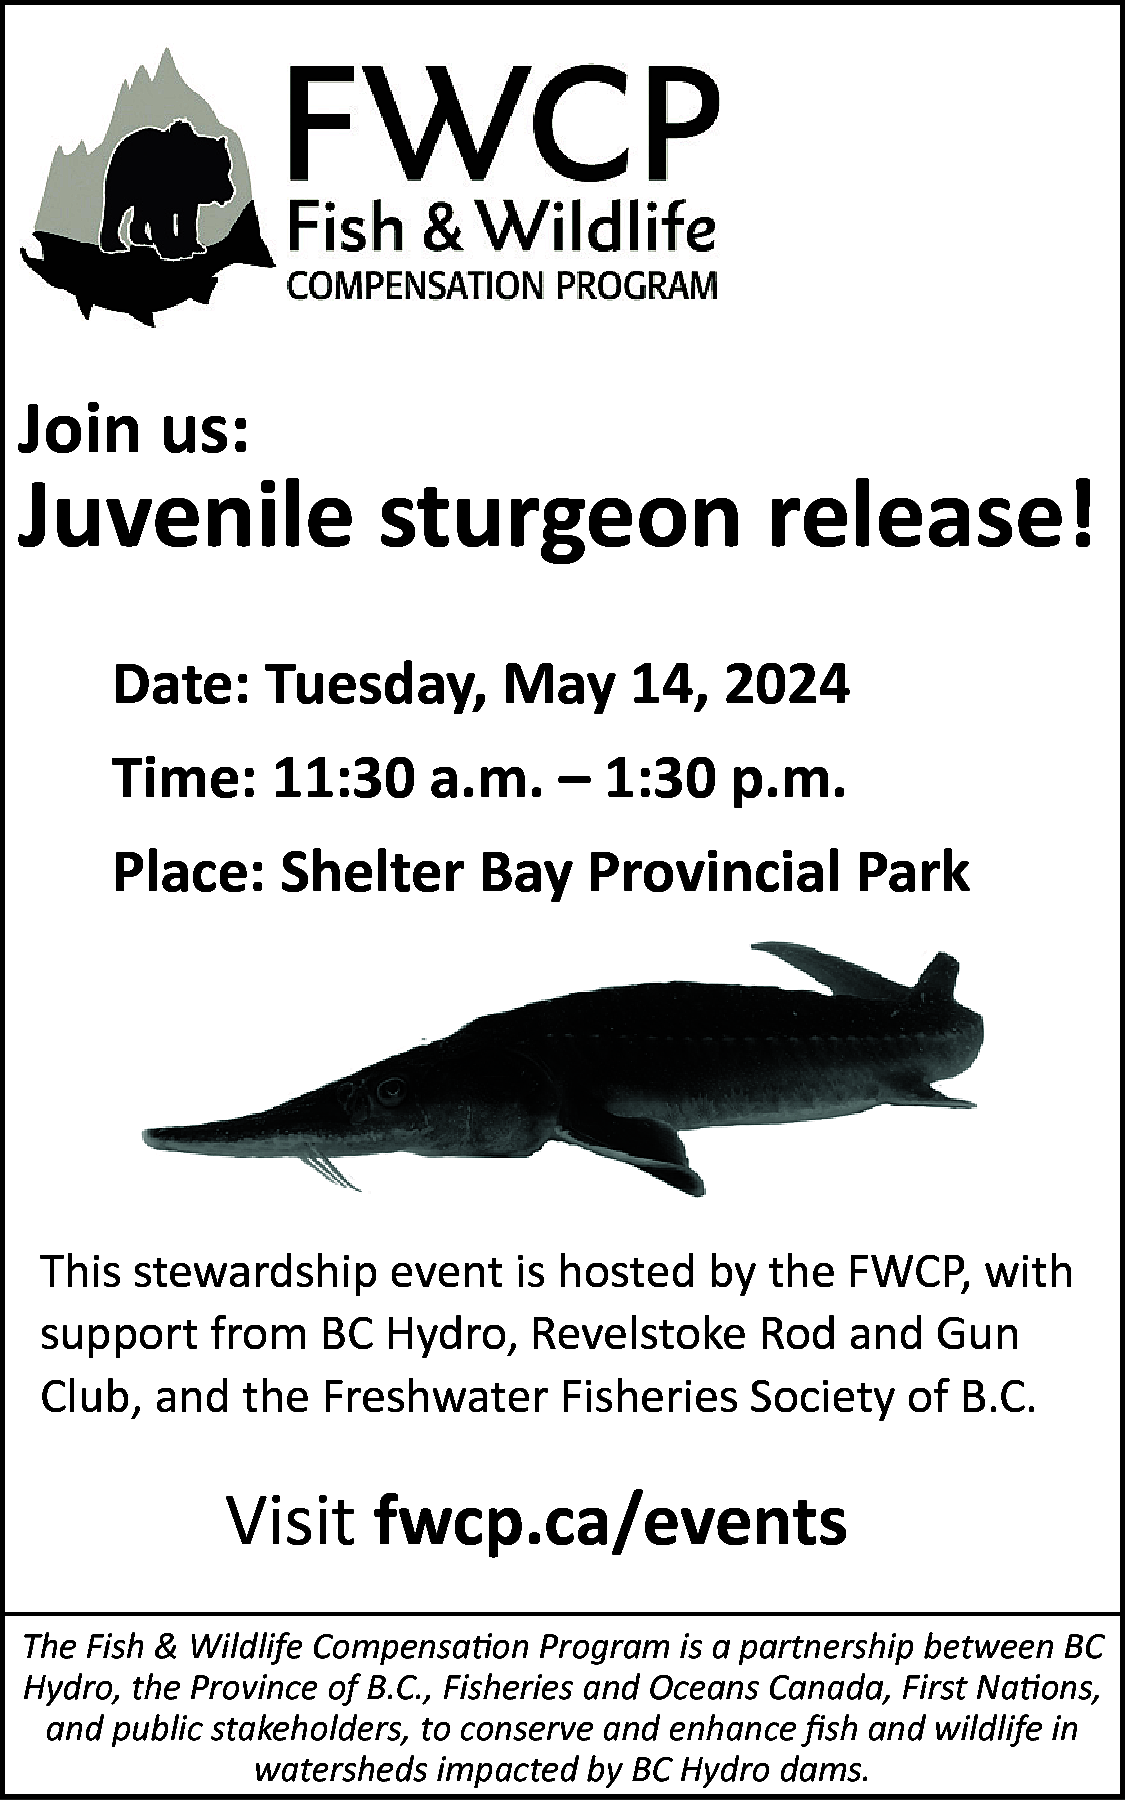 Join us: <br> <br>Juvenile sturgeon  Join us:    Juvenile sturgeon release!  Date: Tuesday, May 14, 2024  Time: 11:30 a.m. – 1:30 p.m.  Place: Shelter Bay Provincial Park    This stewardship event is hosted by the FWCP, with  support from BC Hydro, Revelstoke Rod and Gun  Club, and the Freshwater Fisheries Society of B.C.    Visit fwcp.ca/events  The Fish & Wildlife Compensation Program is a partnership between BC  Hydro, the Province of B.C., Fisheries and Oceans Canada, First Nations,  and public stakeholders, to conserve and enhance fish and wildlife in  watersheds impacted by BC Hydro dams.    